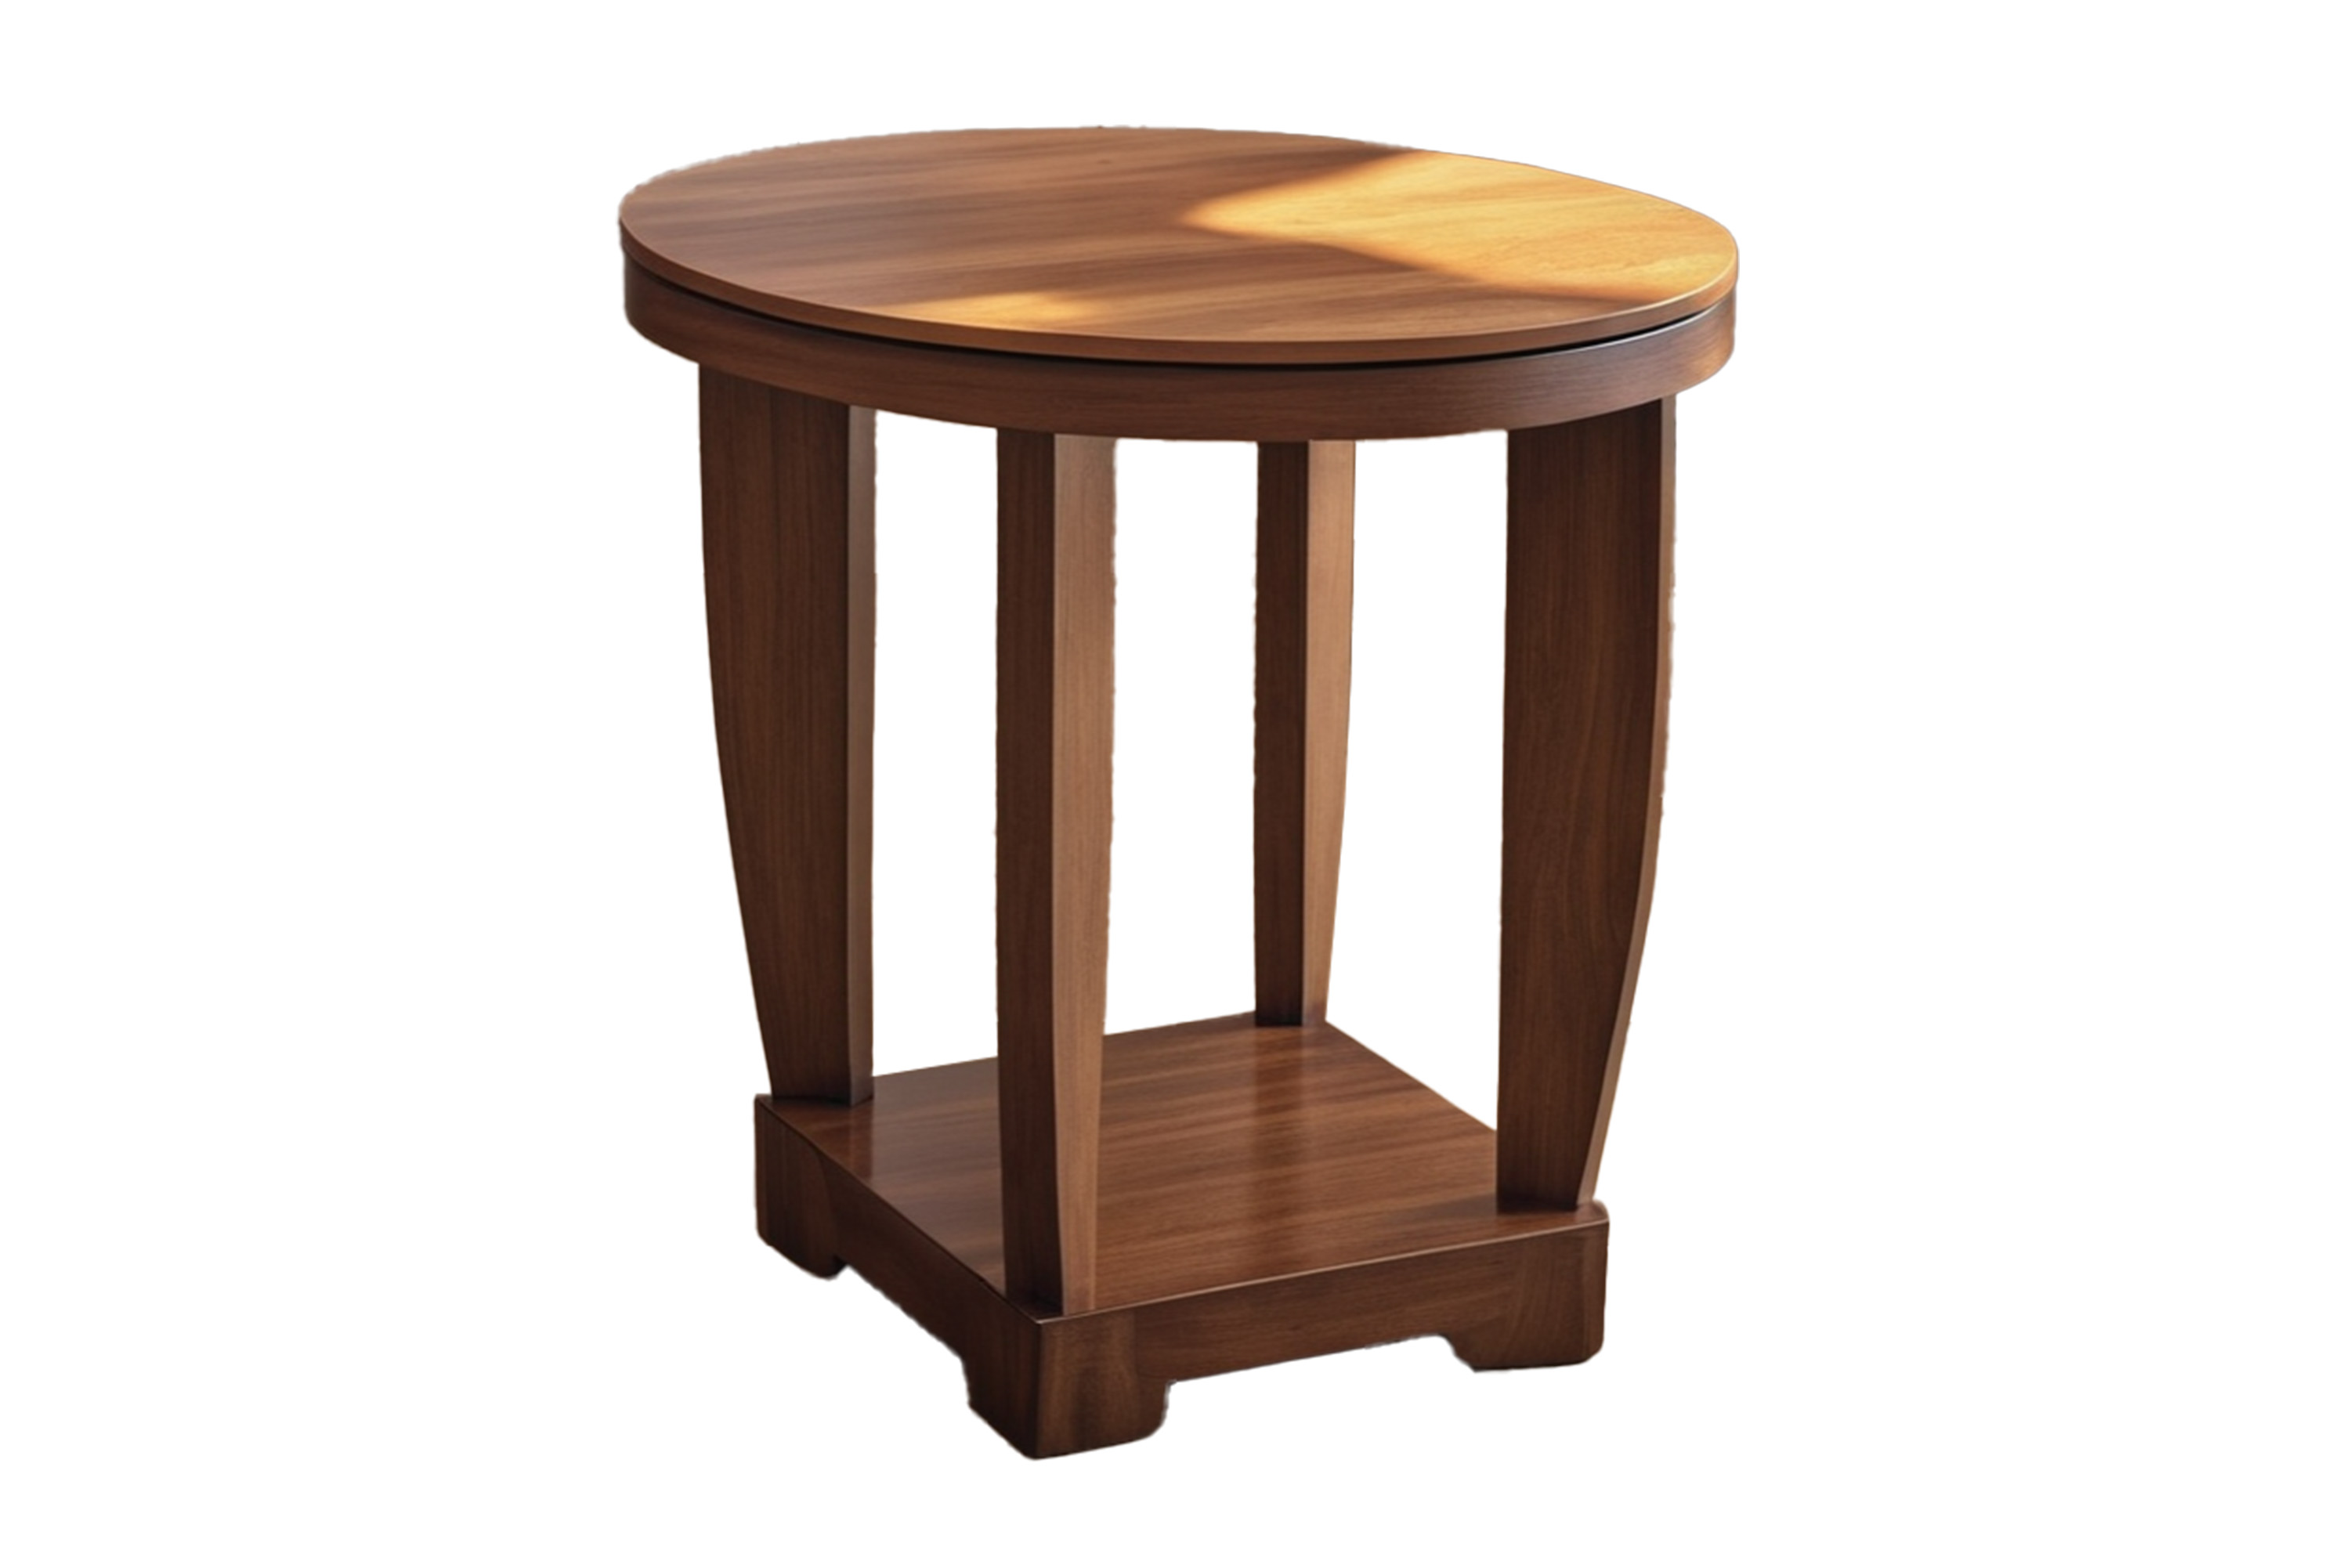 Art Deco side table with walnut